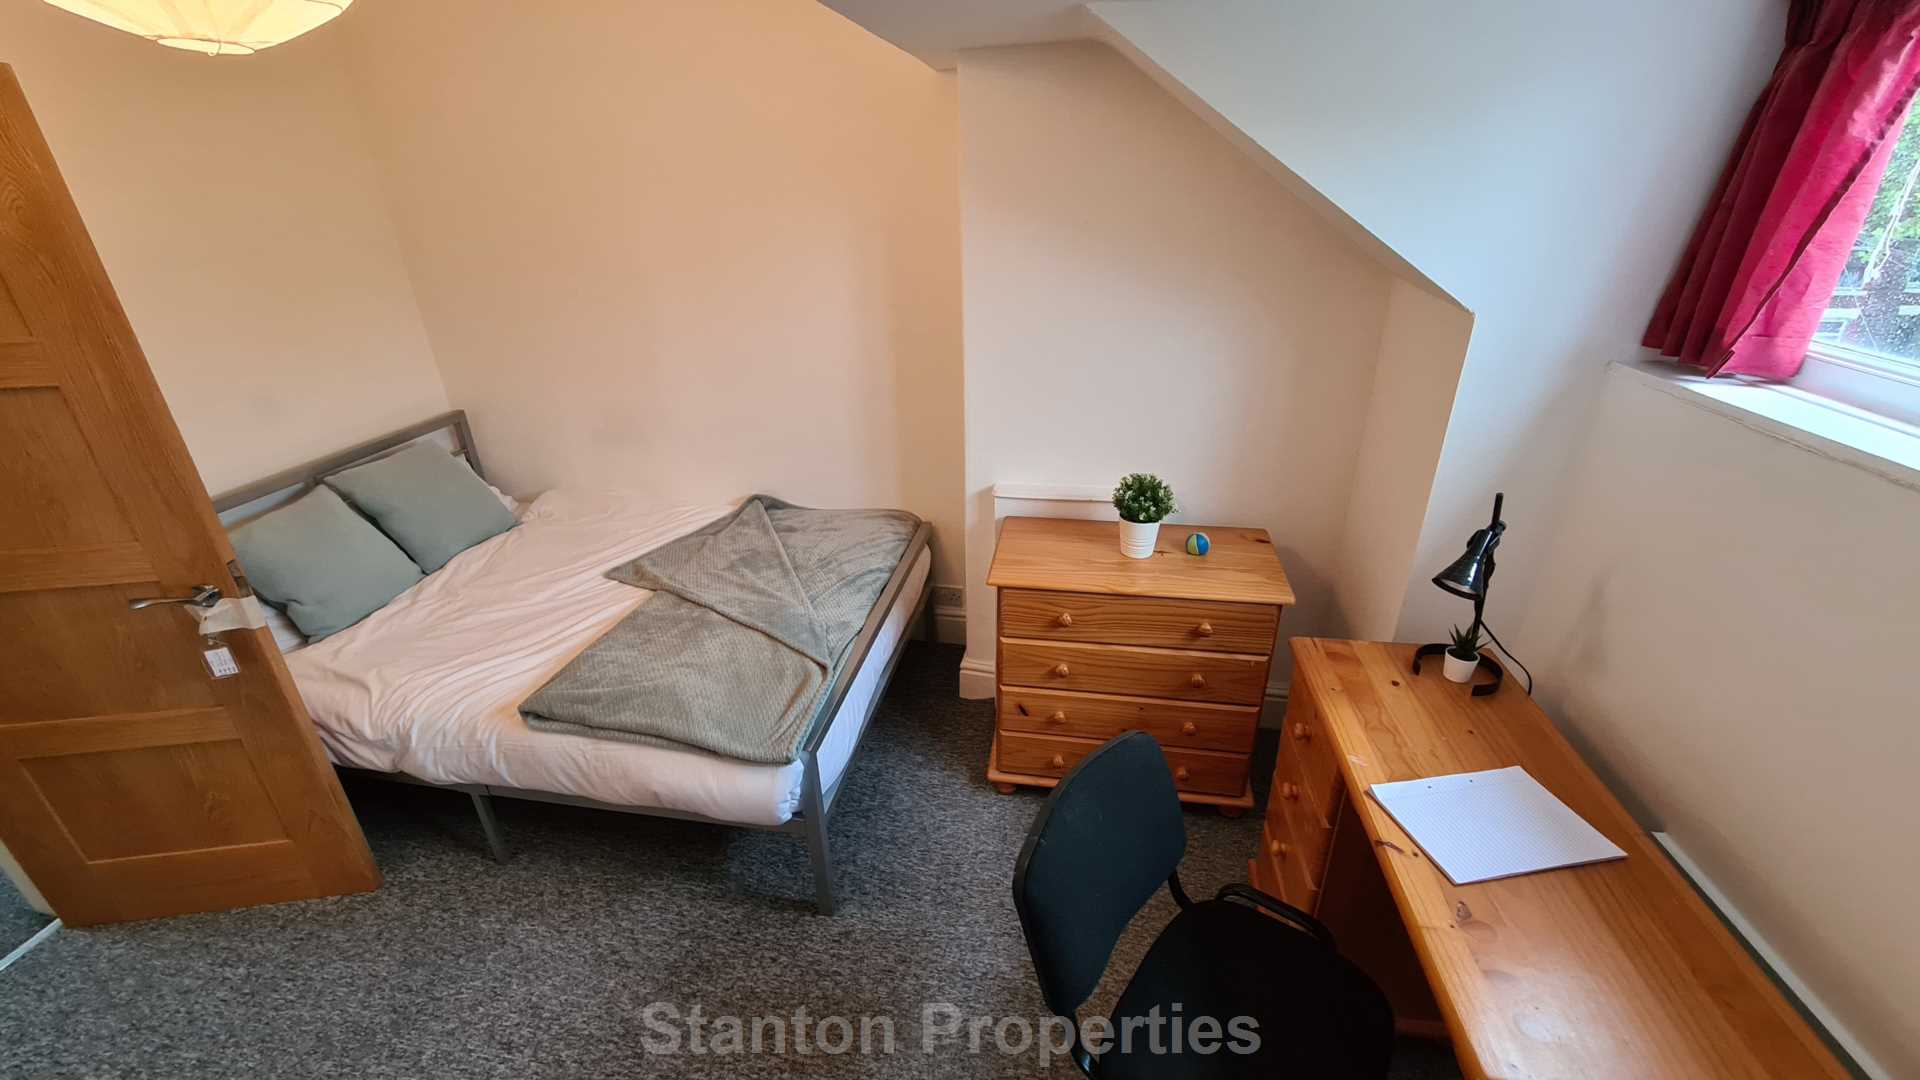 £145 pppw, See Video Tour, Wellington Road, Fallowfield, Image 30